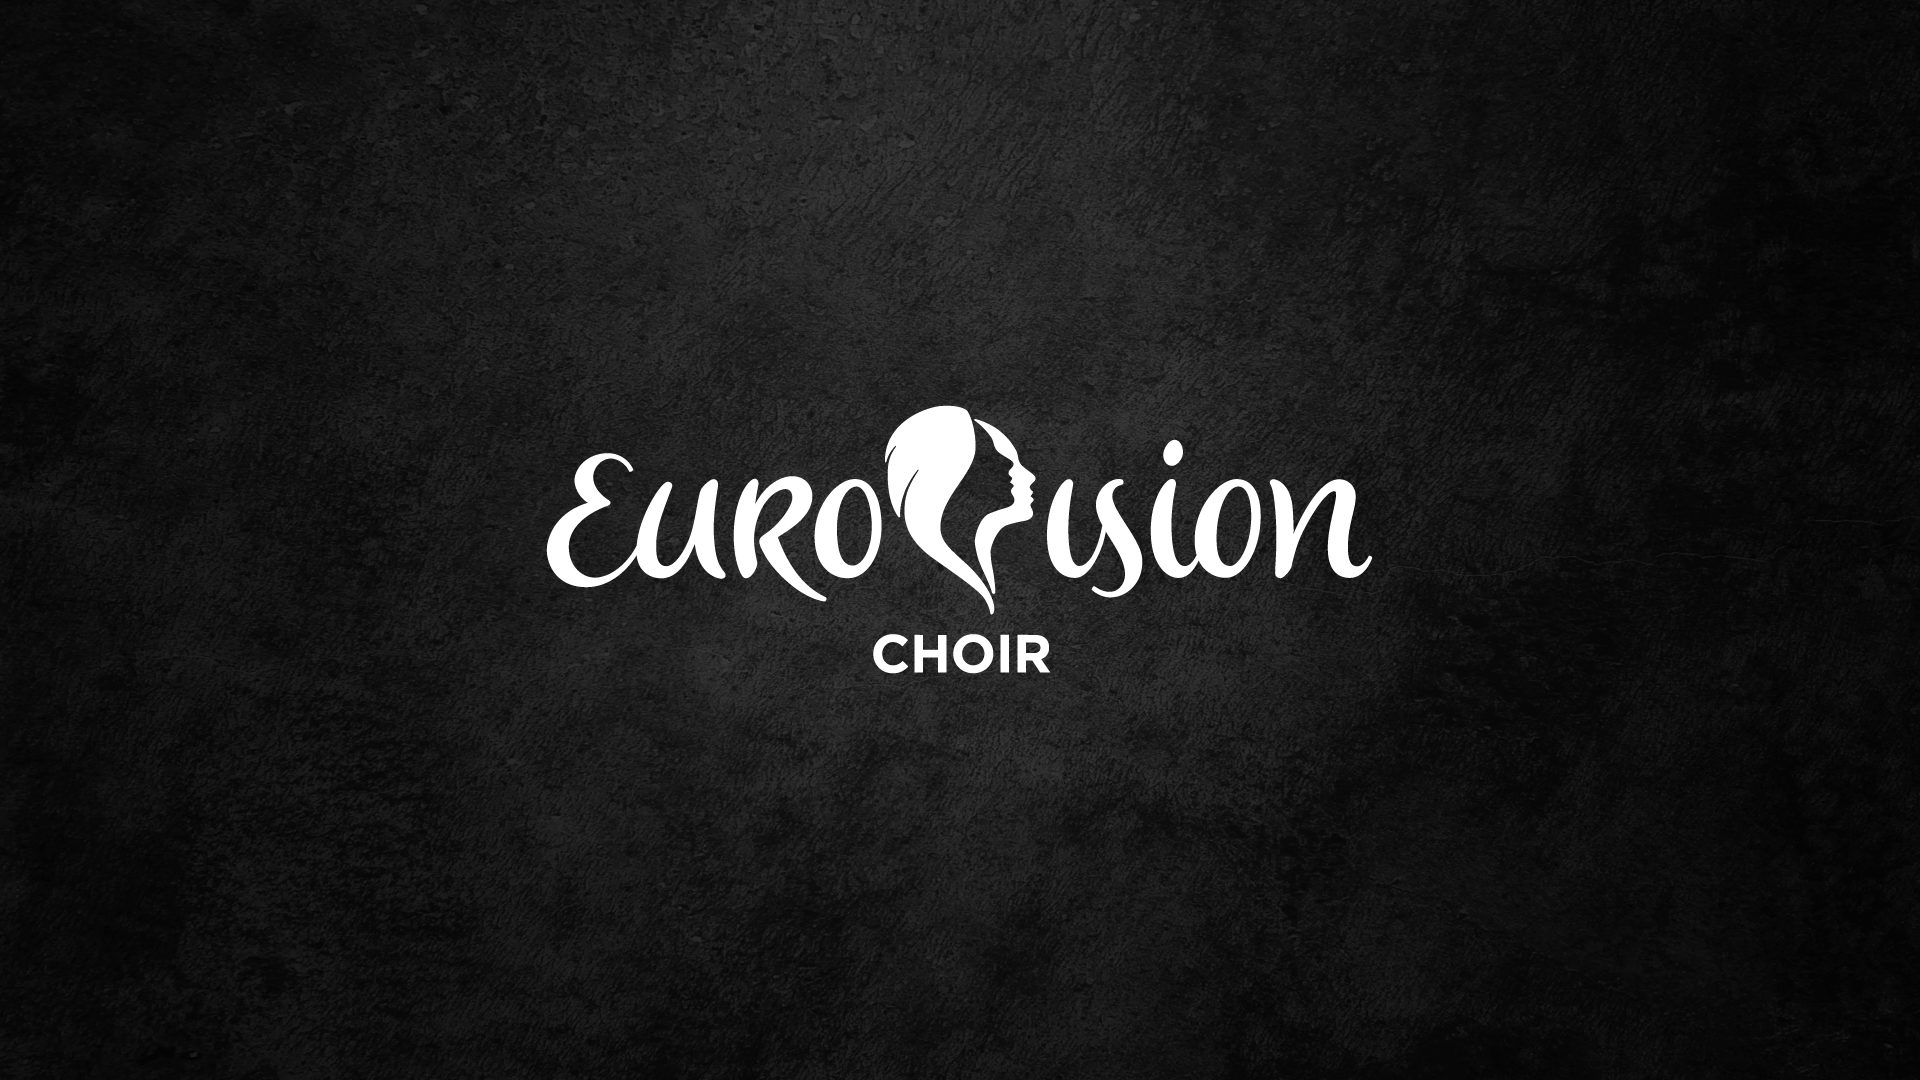 10 countries to compete at Eurovision Choir of the Year 2019 in Gothenburg